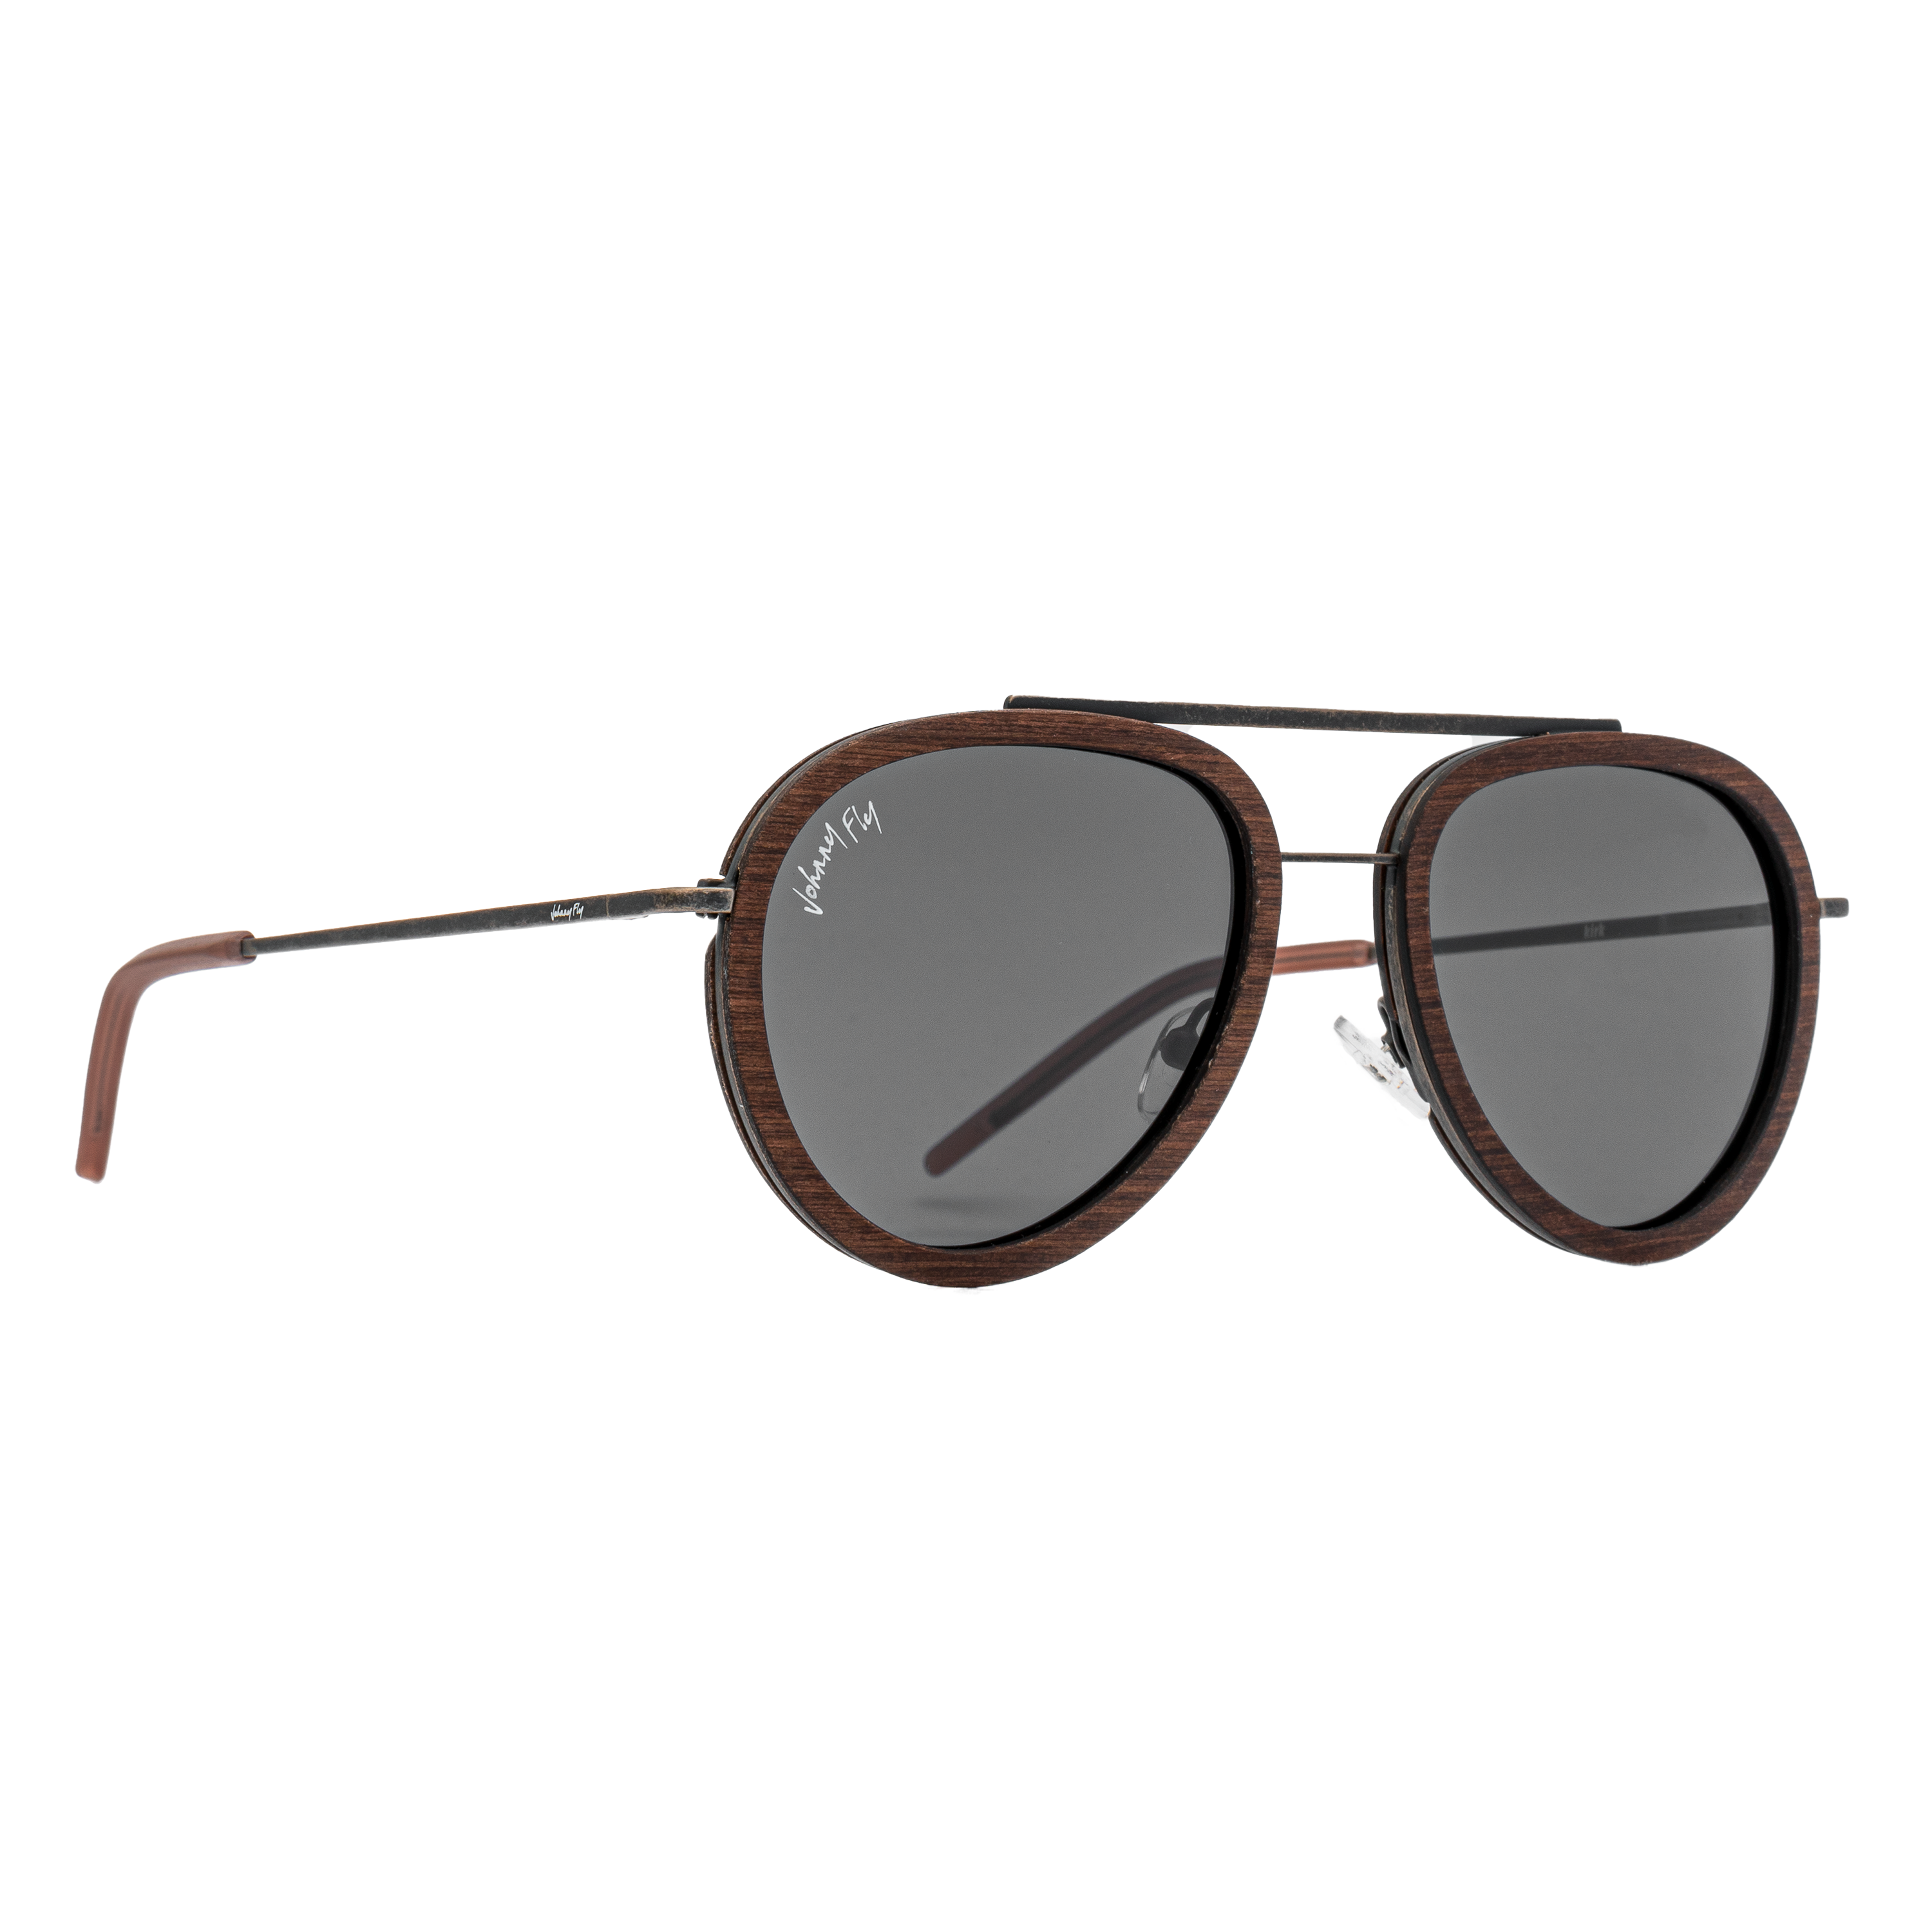 Buy online Lv Unisex Sunglasses Shades In Pakistan, Rs 3000, Best Price